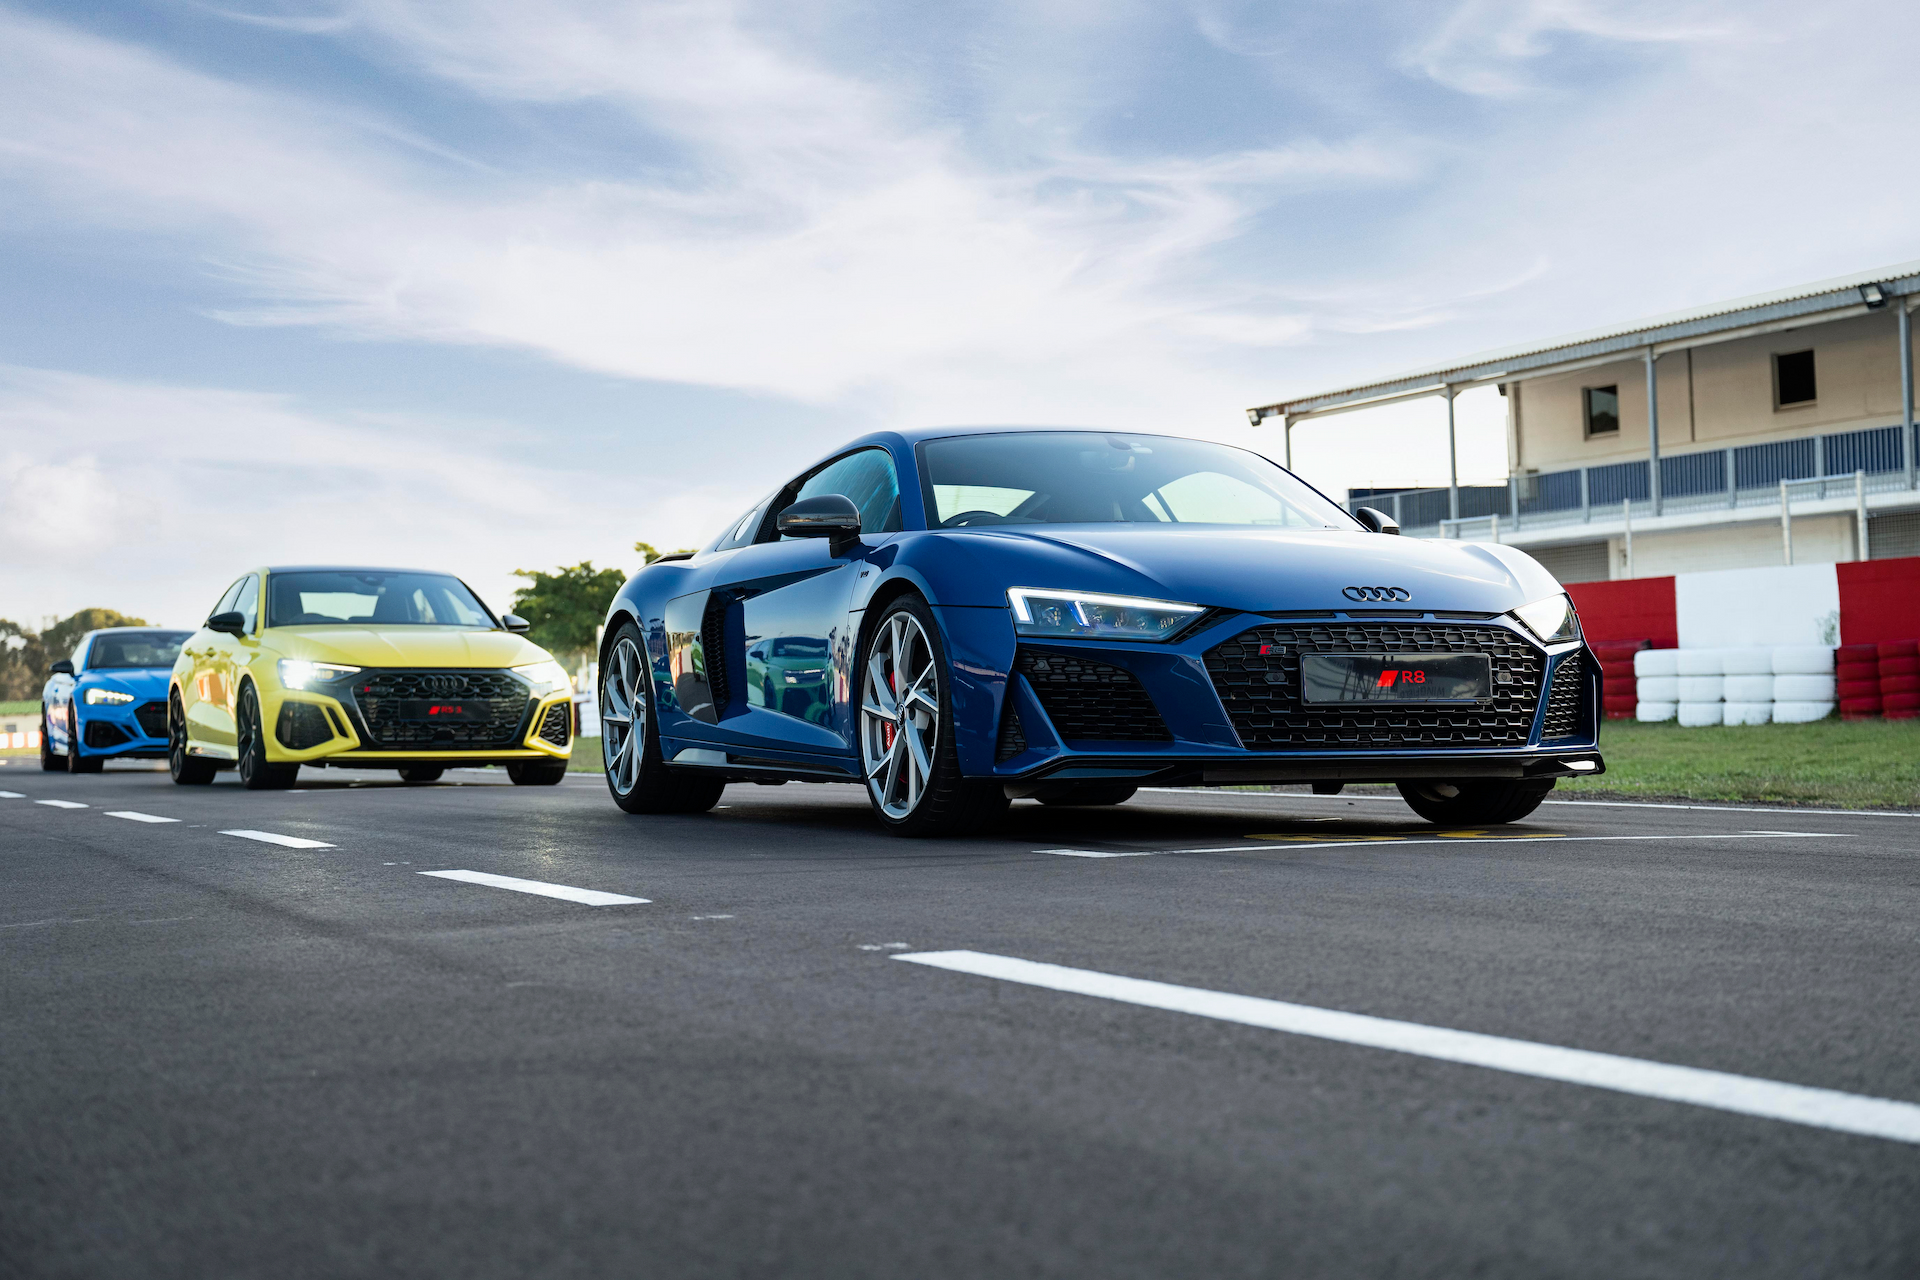 Audi driving experience returns to South Africa